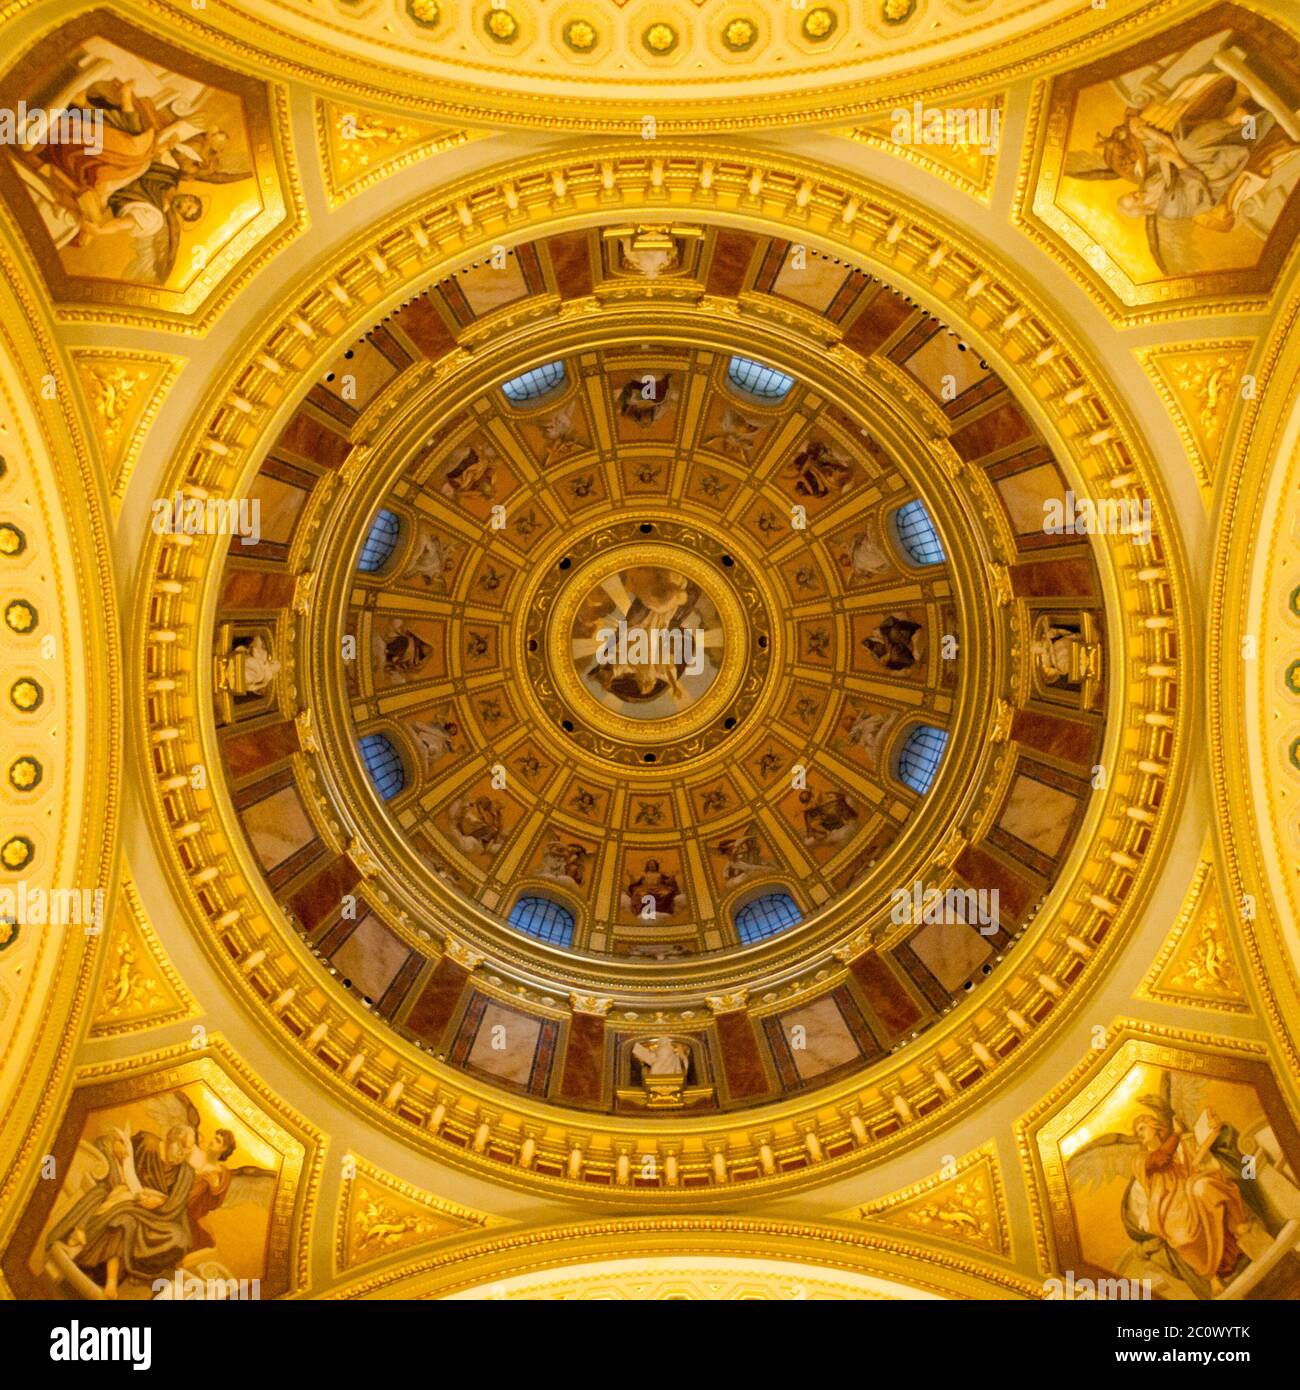 Indoor view of colorful picturesque dome ceiling in Saint Stephen's Basilica, Budapest, Hungary, Europe. UNESCO World Heritage Site. Stock Photo